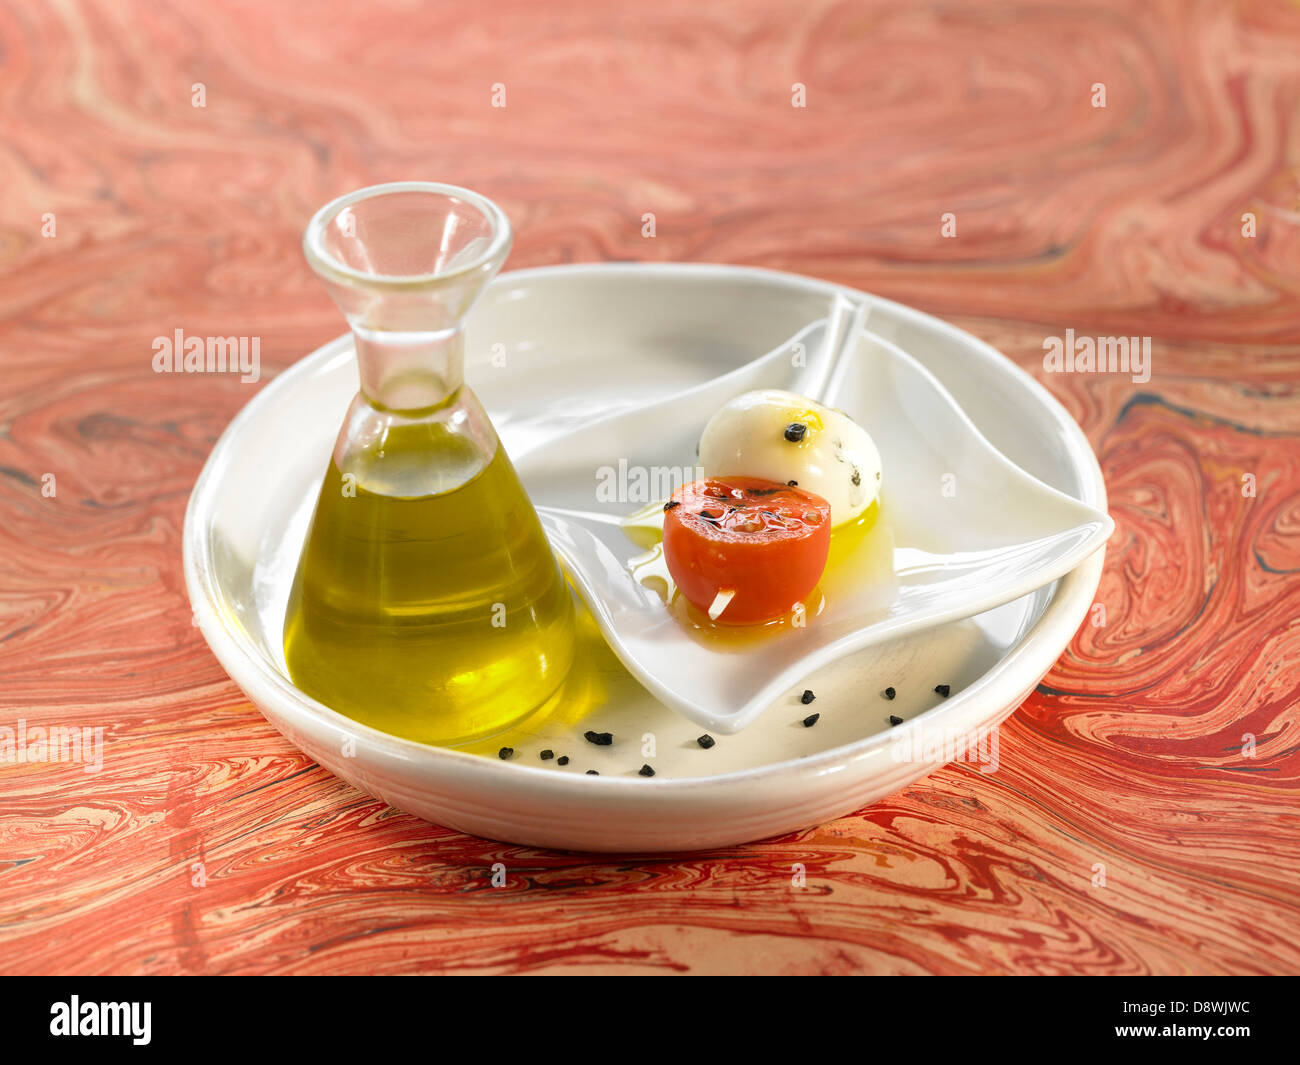 Small bottle of olive oil Stock Photo